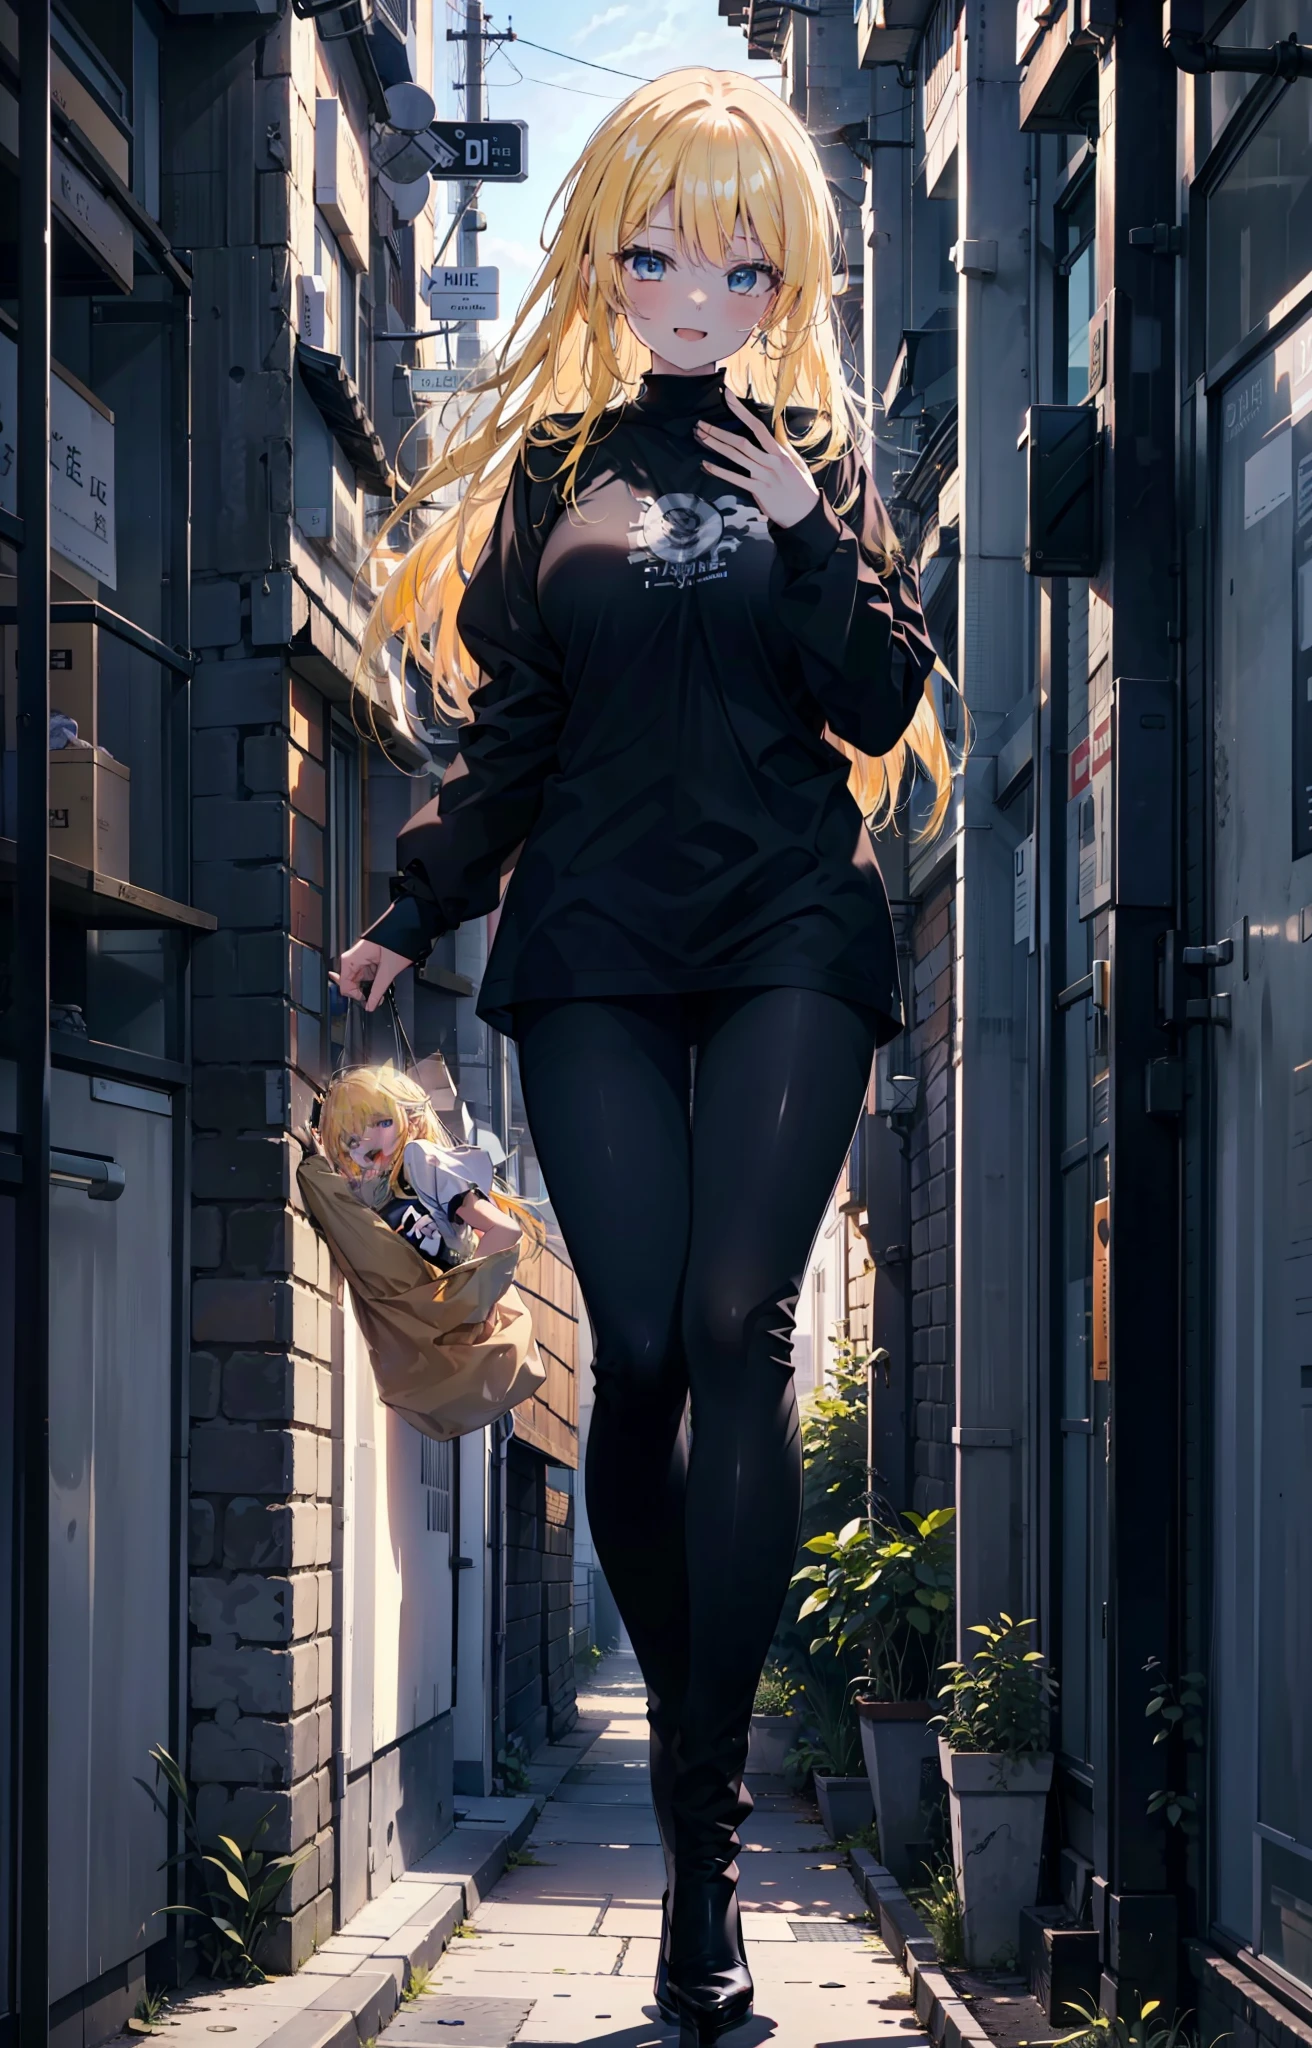 Eliase, catalyst, Yellow Hair, blue eyes,Long Hair,happy smile, smile, Open your mouth, Oversized black y-shirt,Big Breasts,black skinny pants,Stiletto heels,morning,morning陽,The sun is rising,walking,whole bodyがイラストに入るように,
break looking at viewer,whole body,
break outdoors, In town,
break (masterpiece:1.2), highest quality, High resolution, unity 8k wallpaper, (figure:0.8), (Beautiful fine details:1.6), Highly detailed face, Perfect lighting, Highly detailed CG, (Perfect hands, Perfect Anatomy),